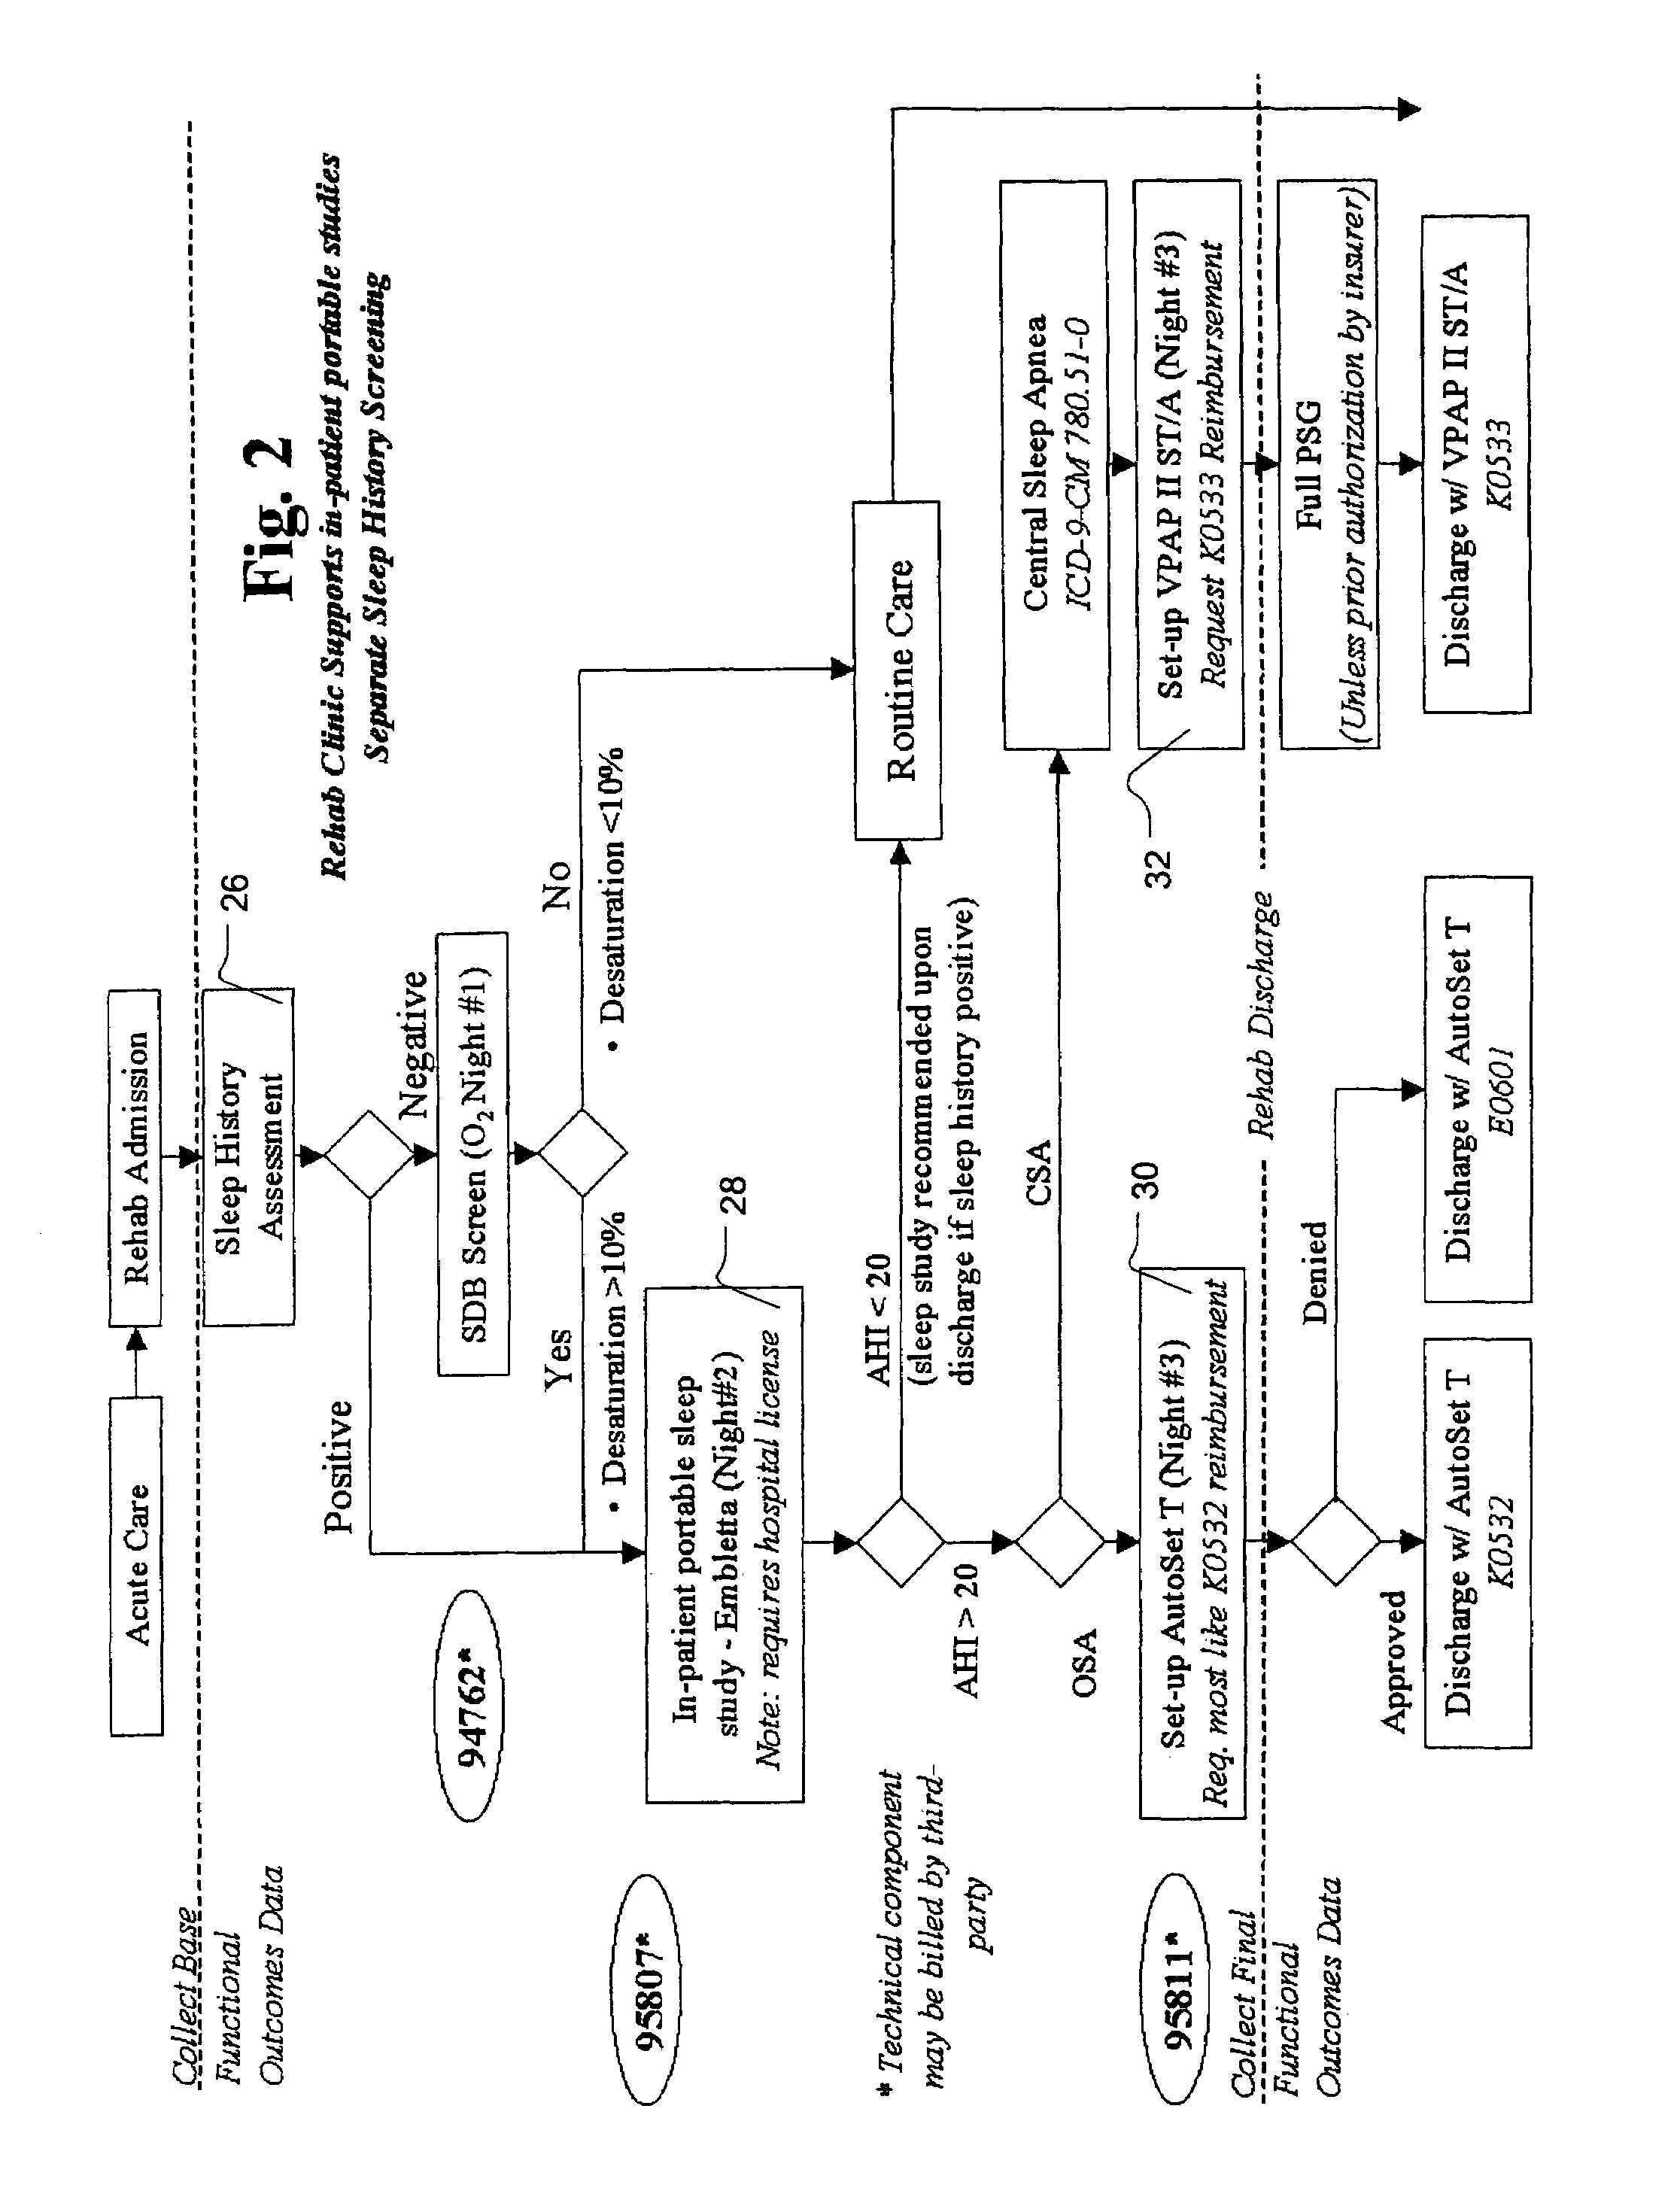 Methods and apparatus for stroke patient treatment